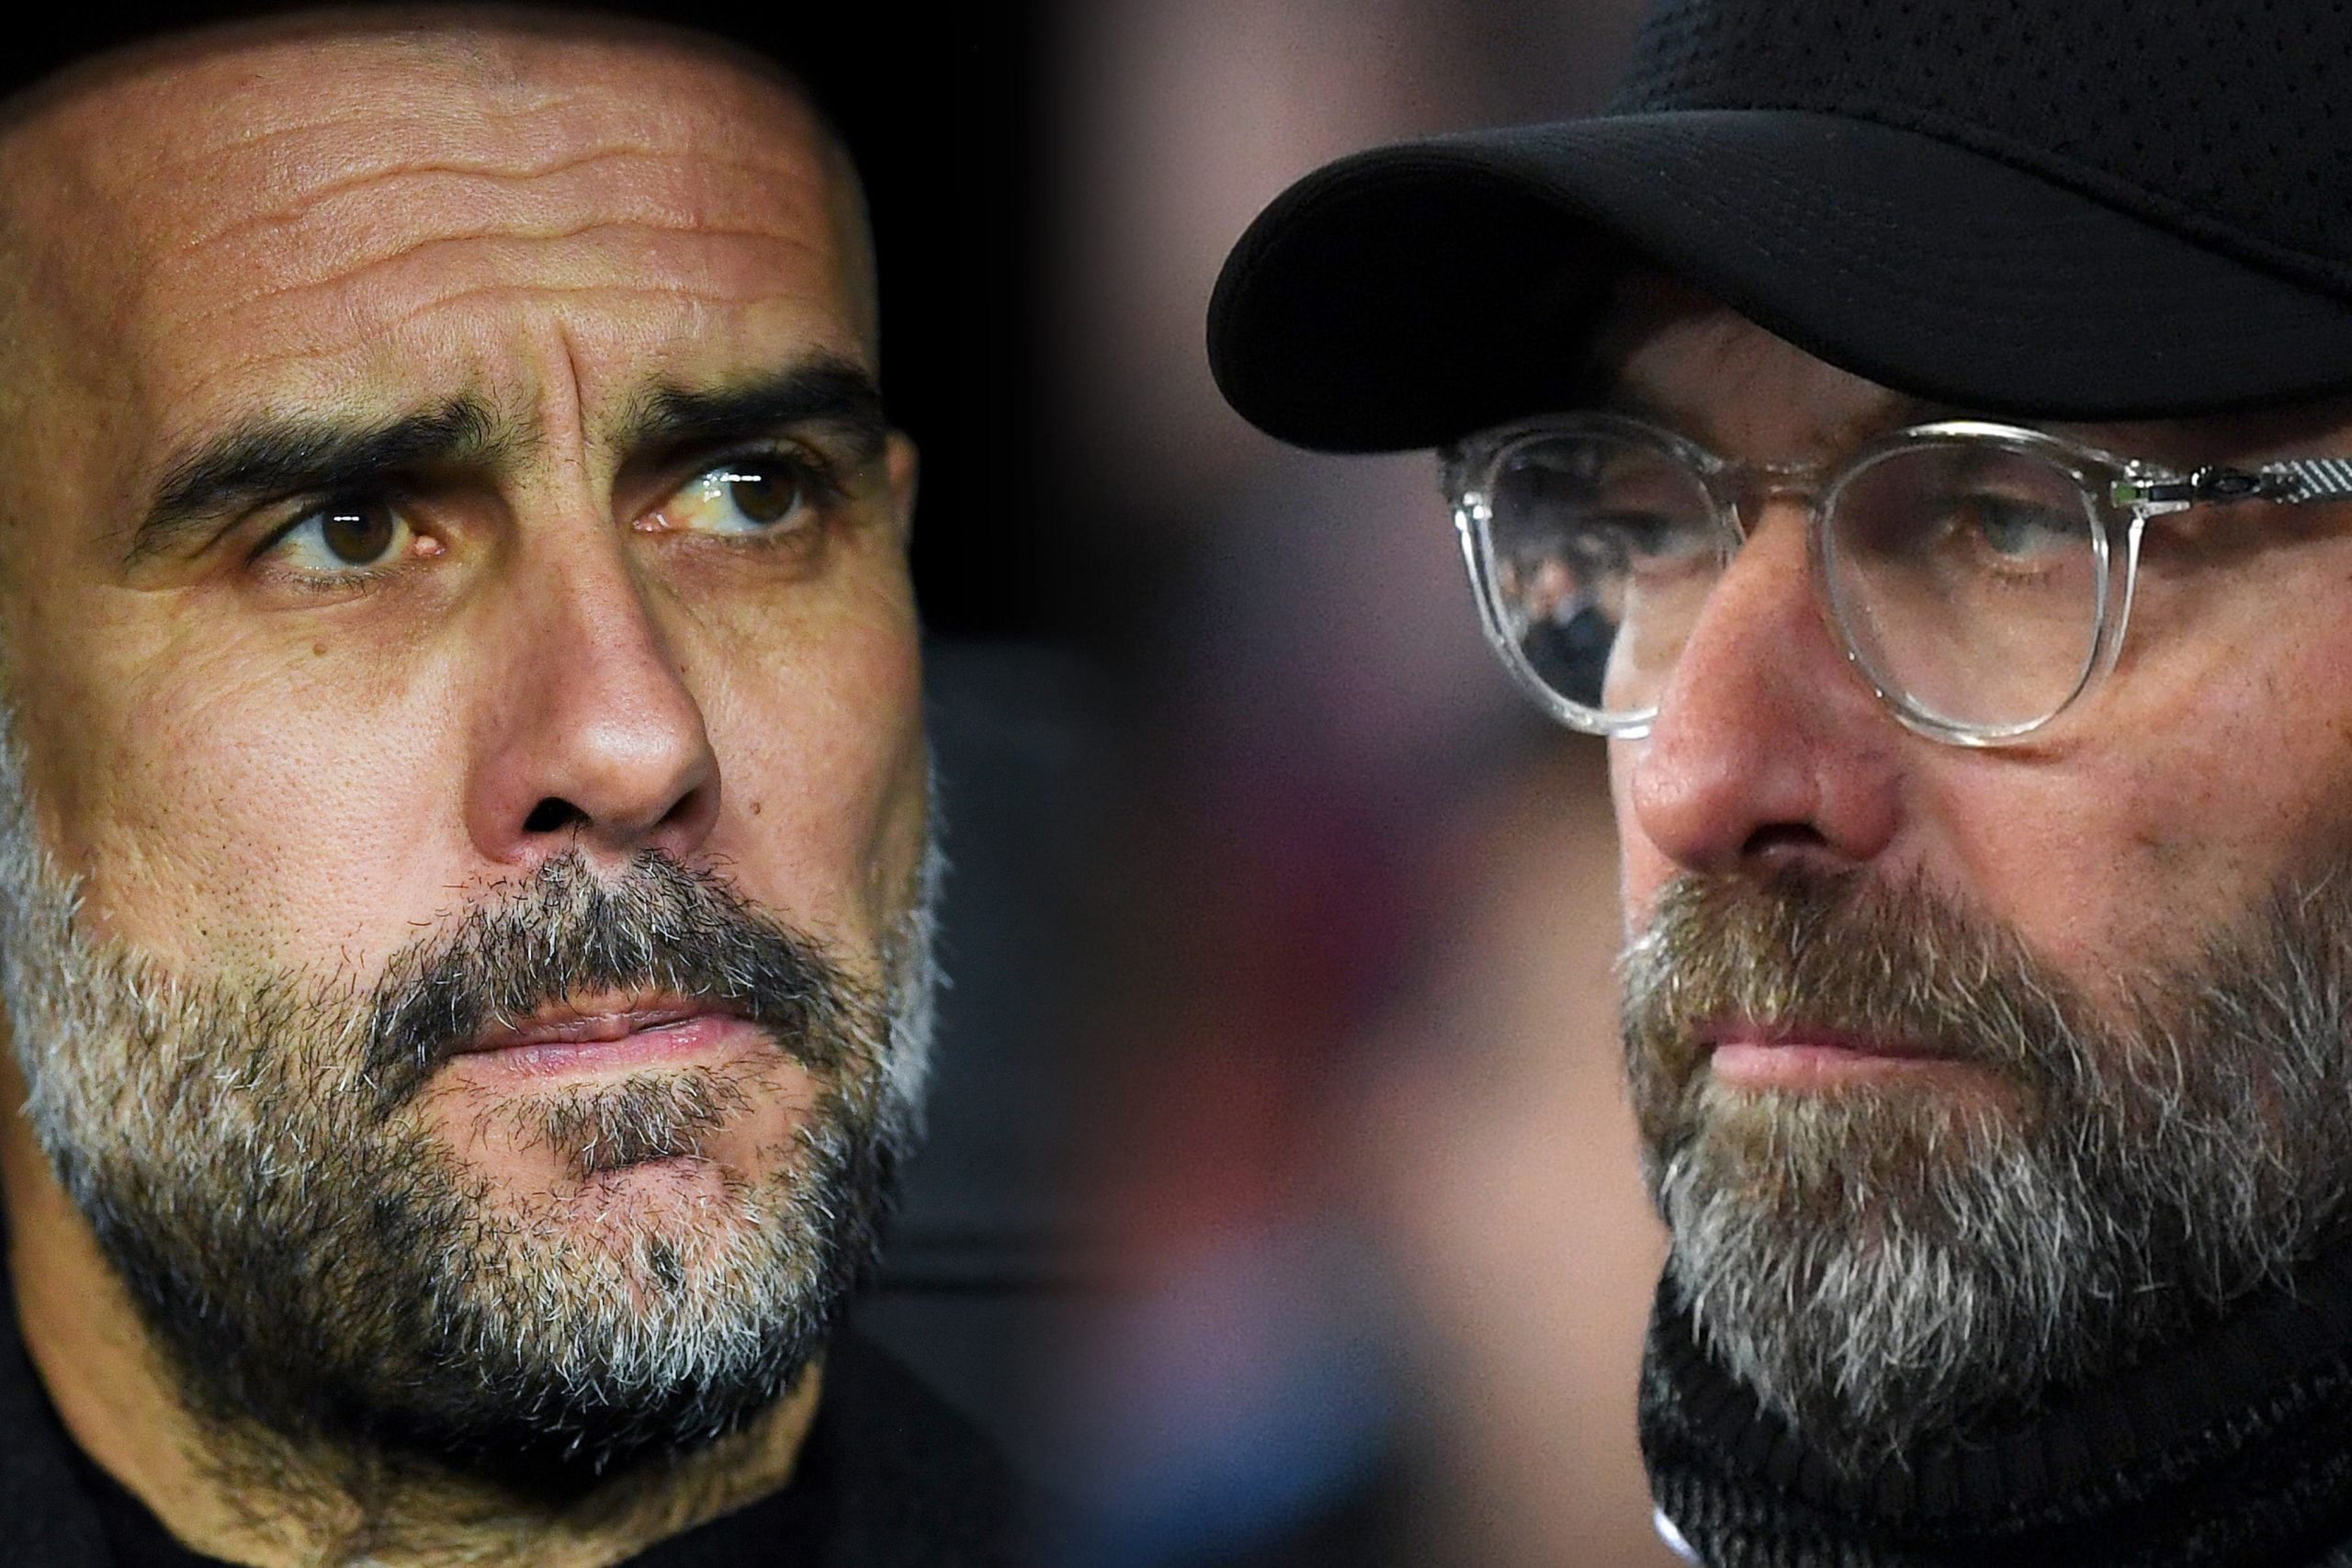 Manchester City Vs Liverpool Tactical Preview - A tactical battle is on the horizon.